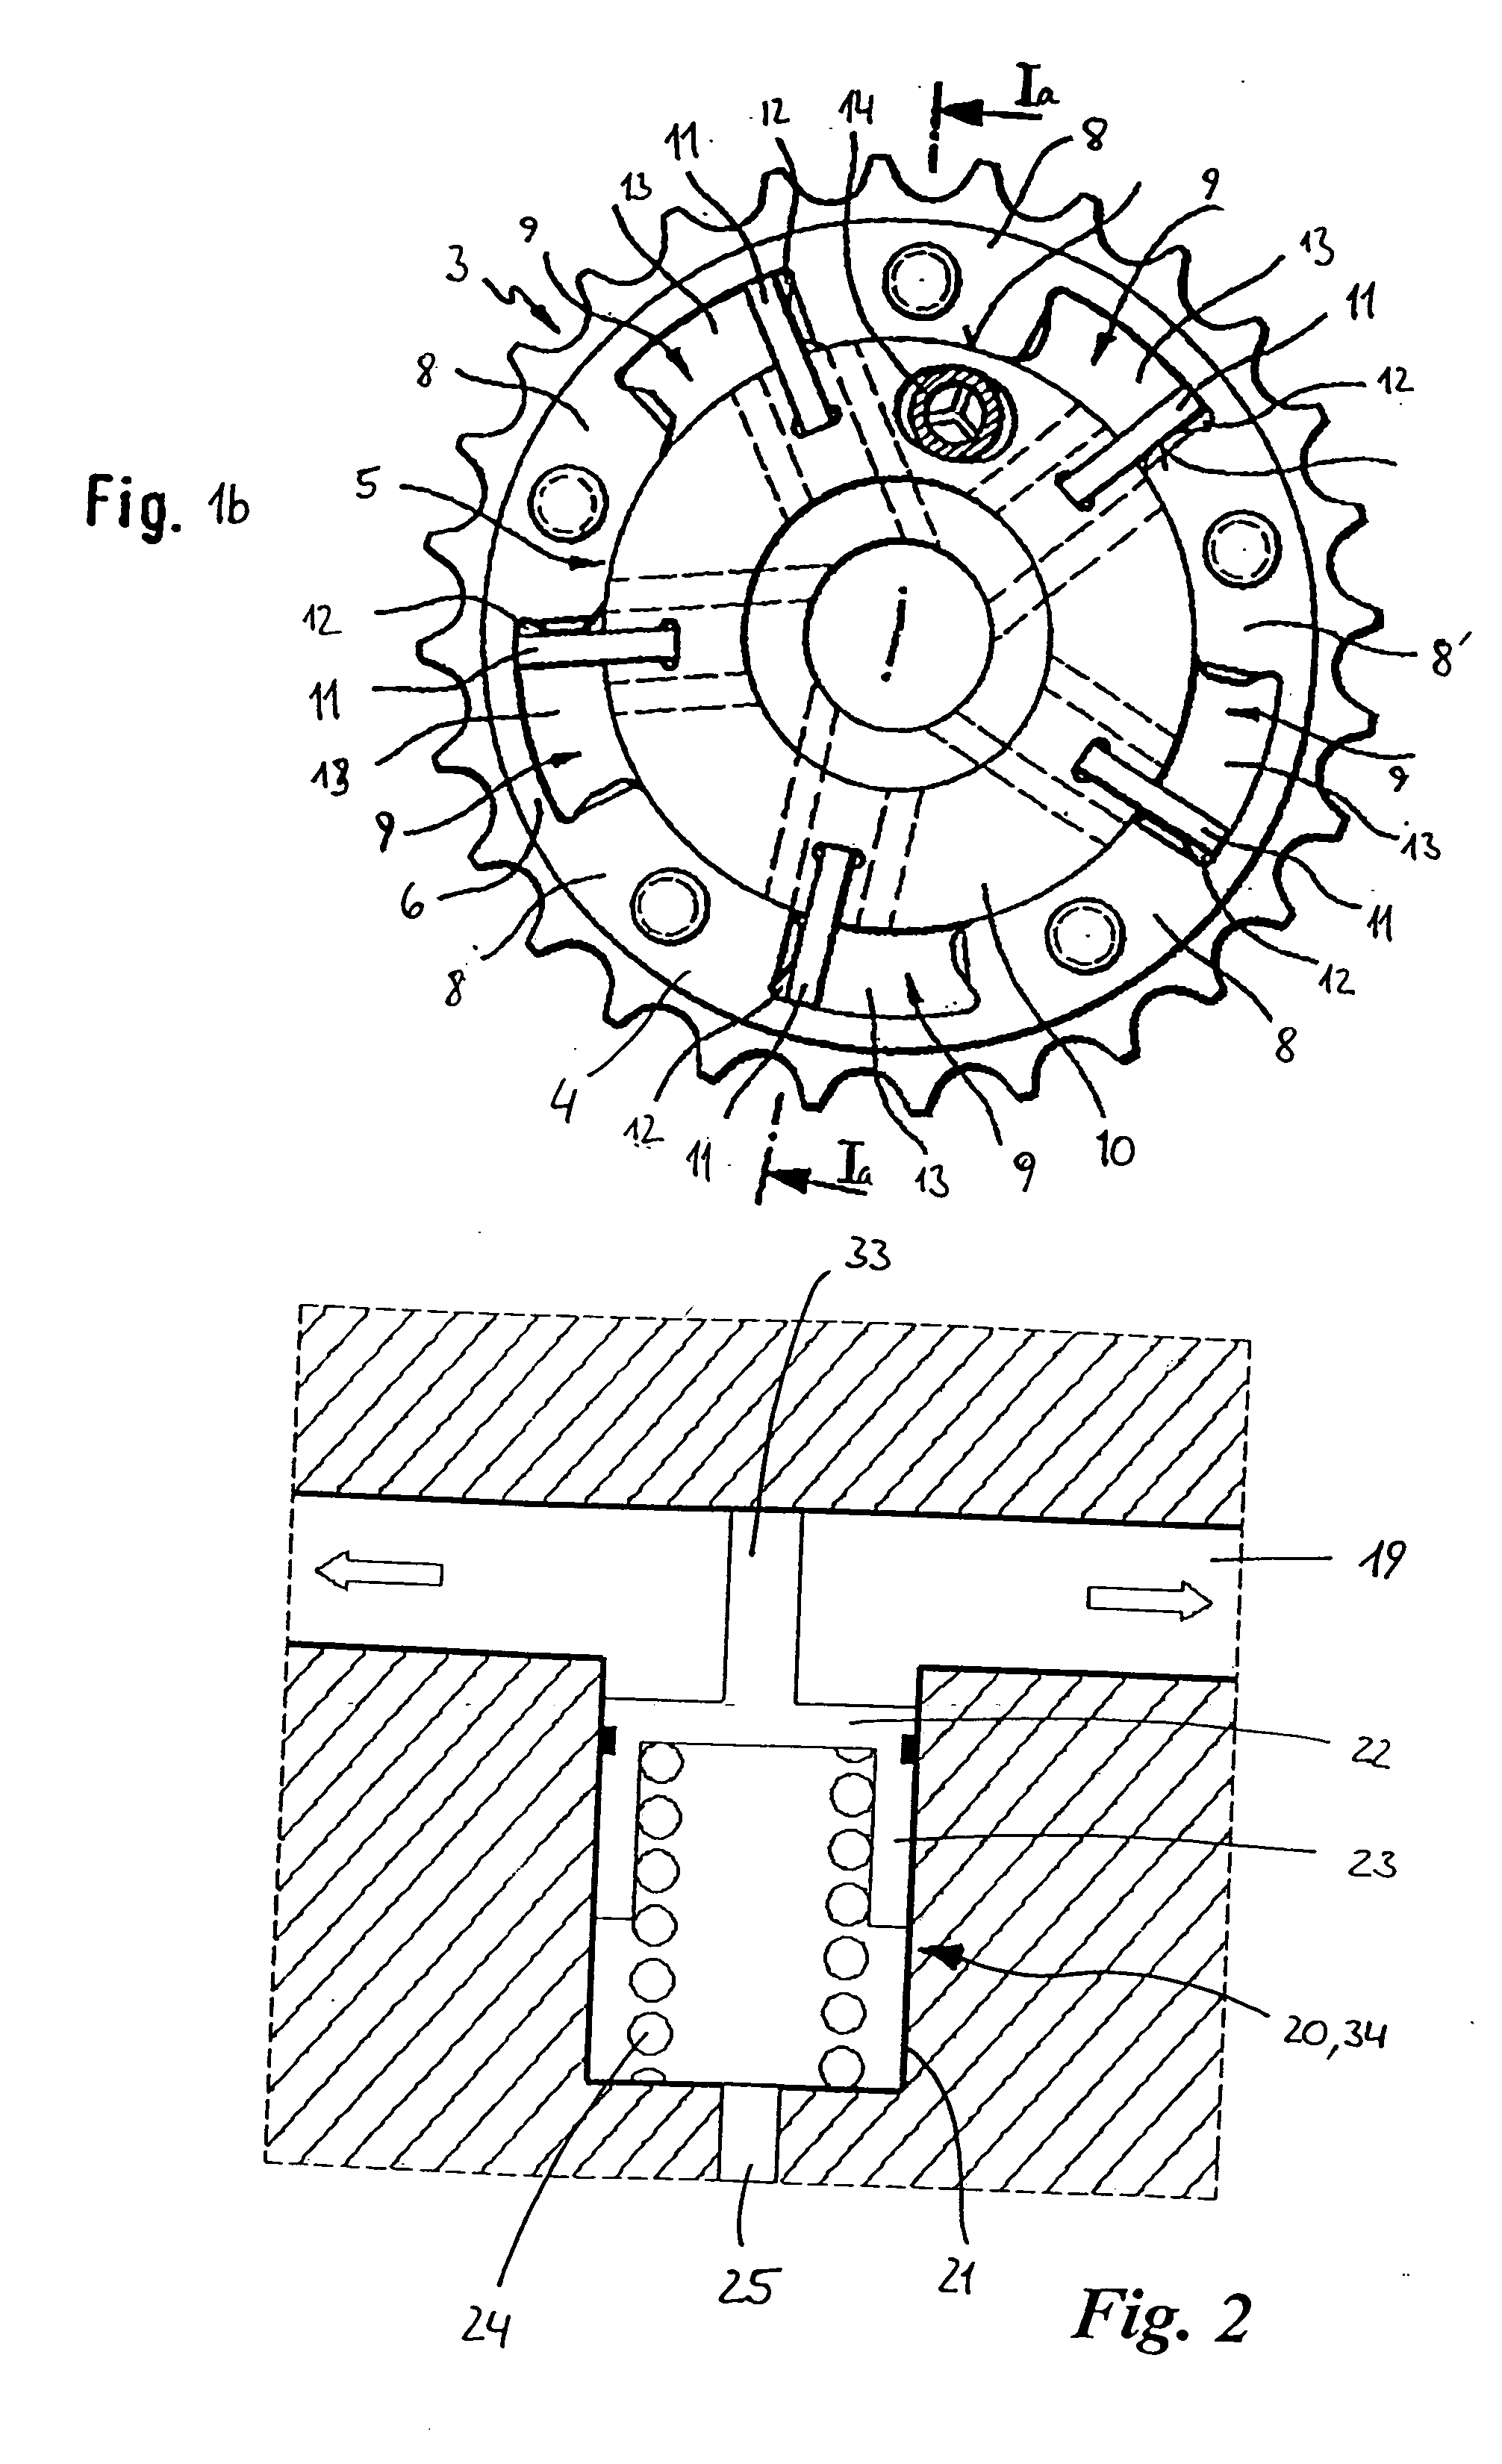 Internal combustion engine having a hydraulic device for adjusting the rotation angle of a camshaft relative to a cranks haft